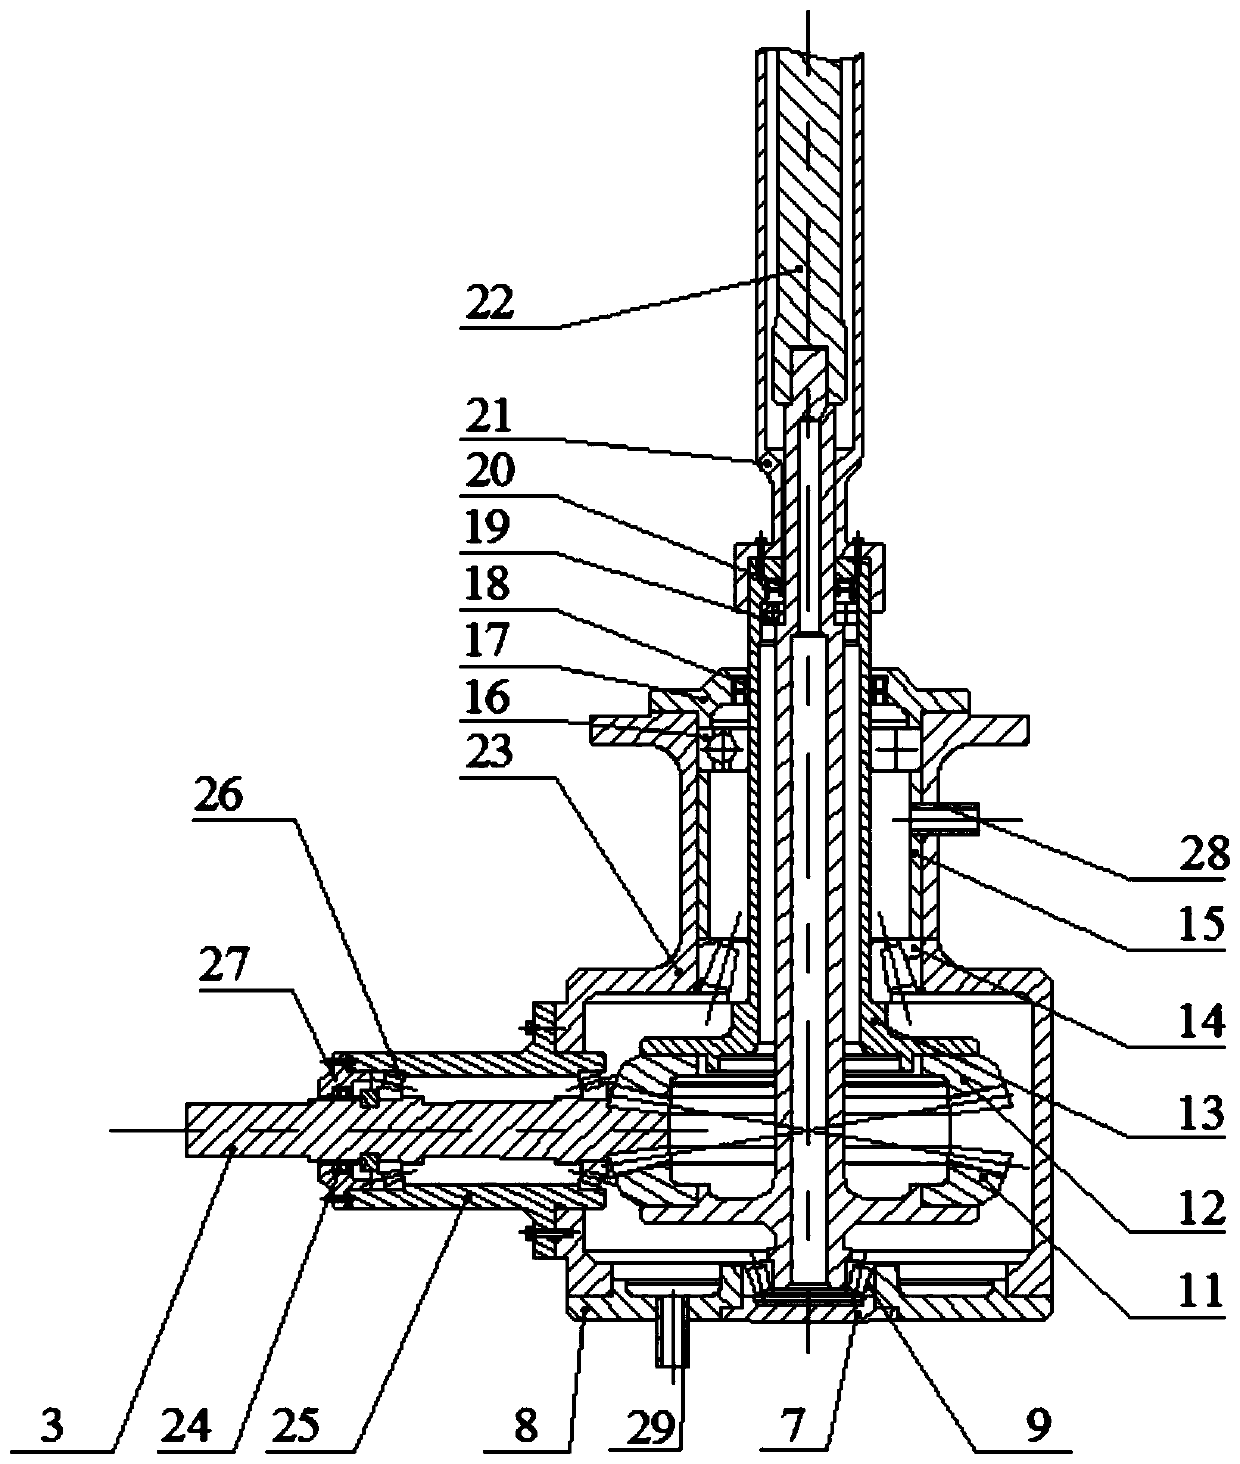 Power system structure of coaxial dual-rotor-wing unmanned aerial vehicle